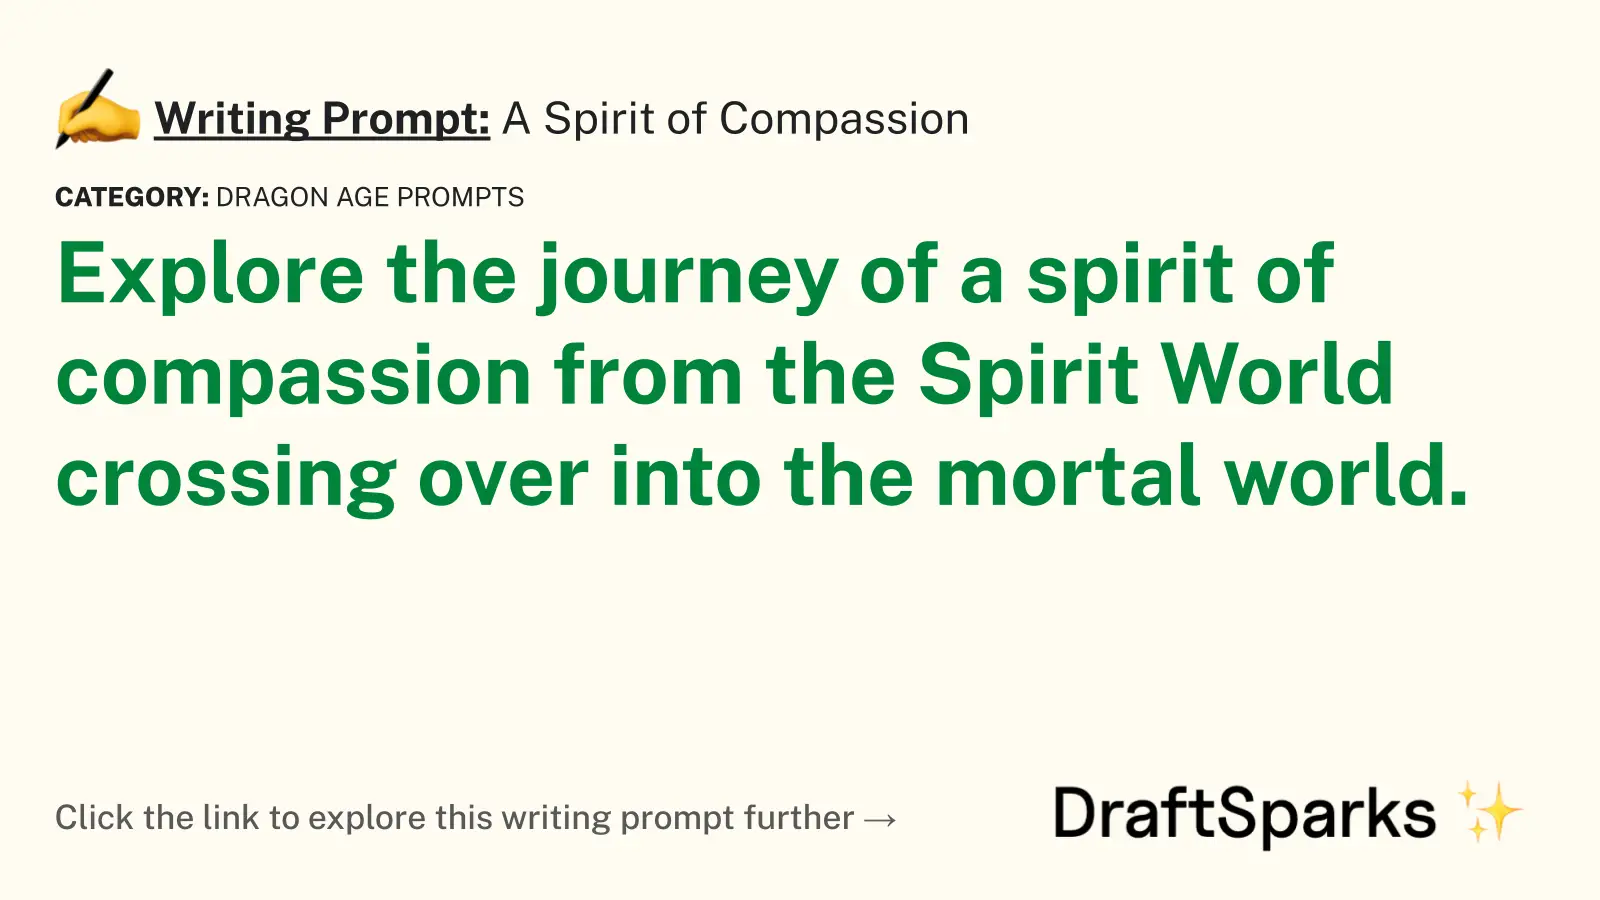 A Spirit of Compassion